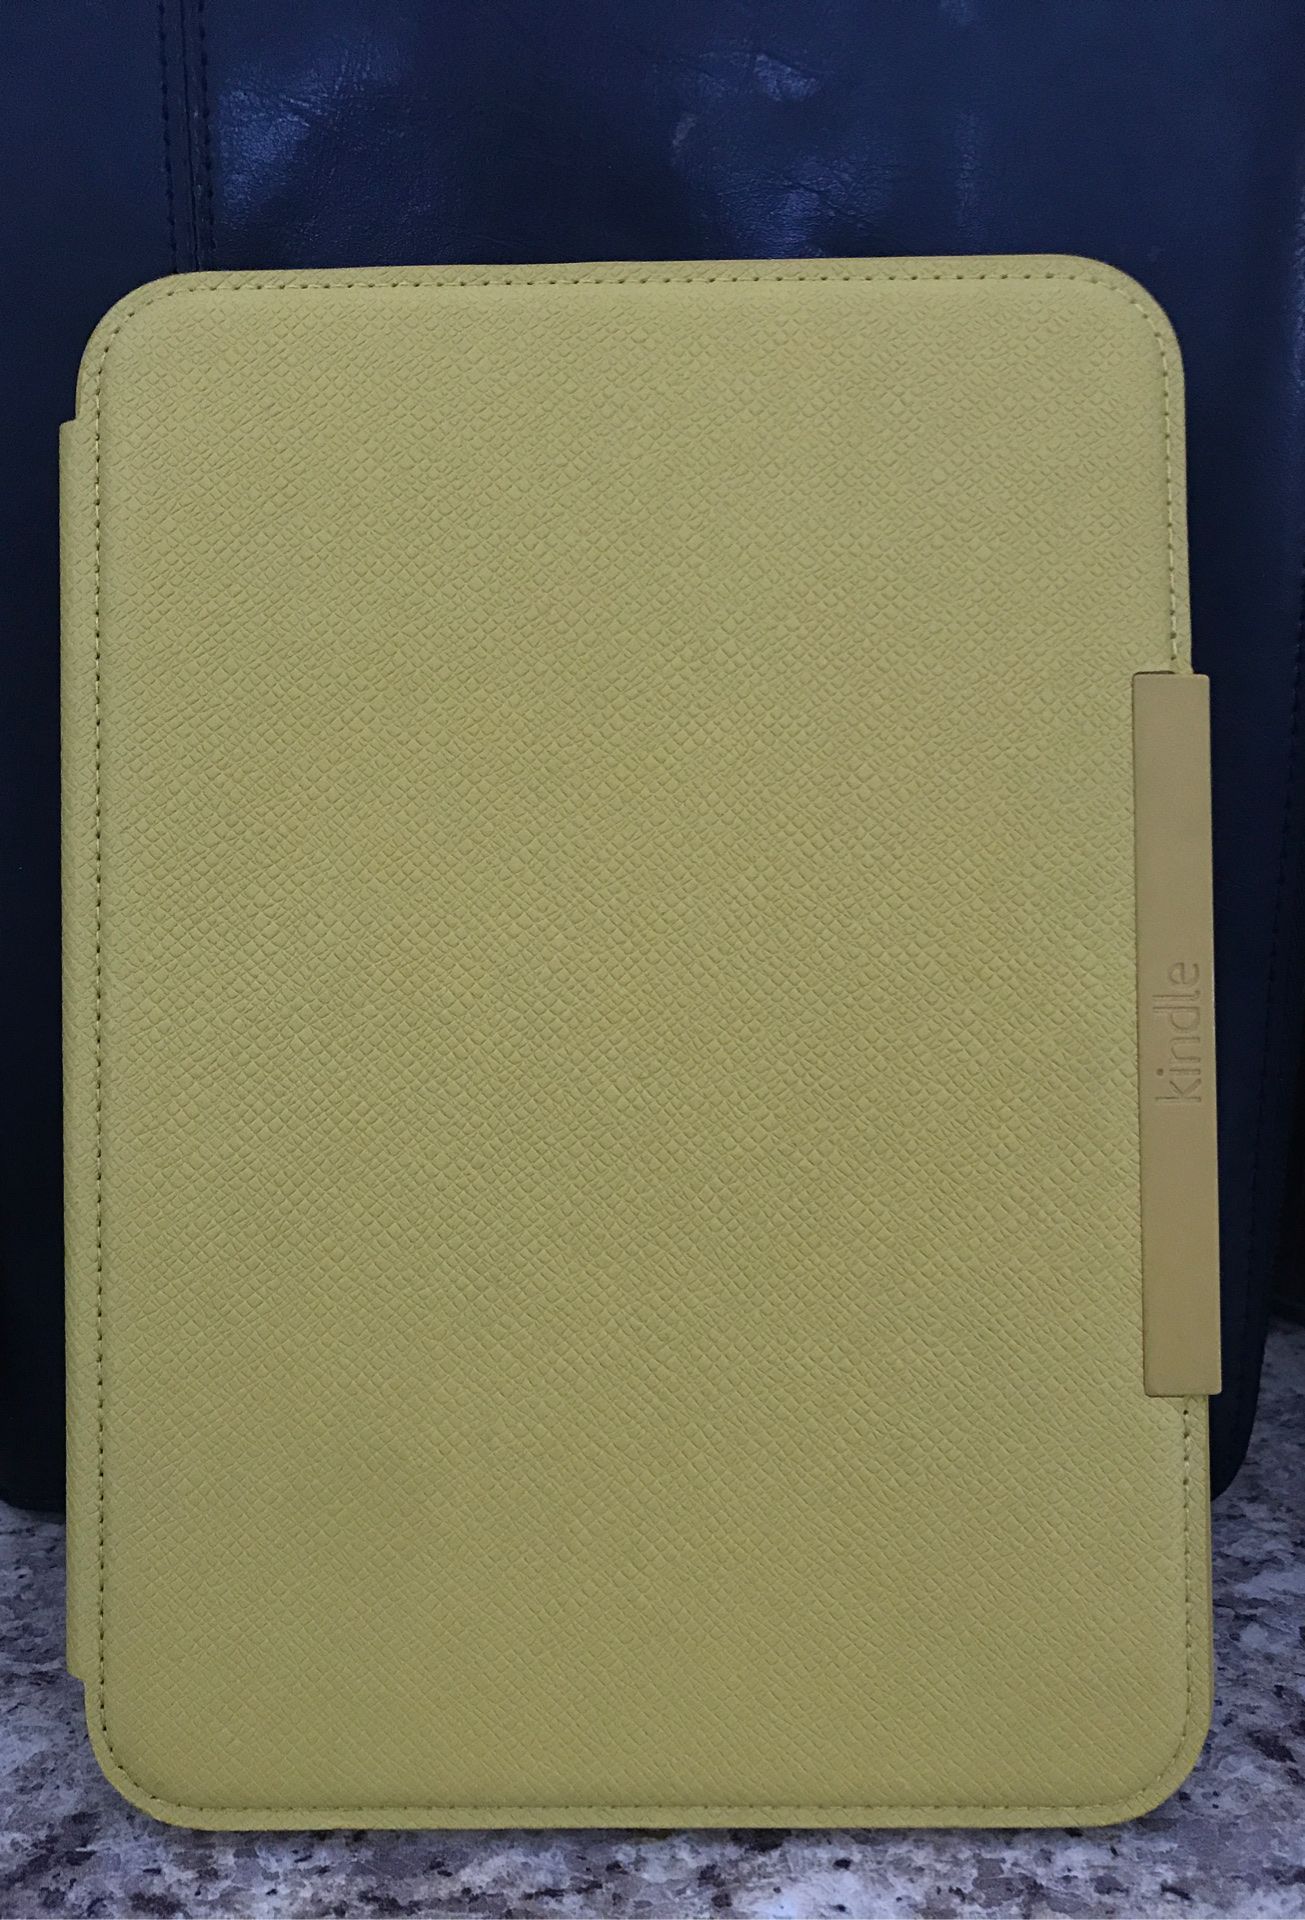 New Kindle cover